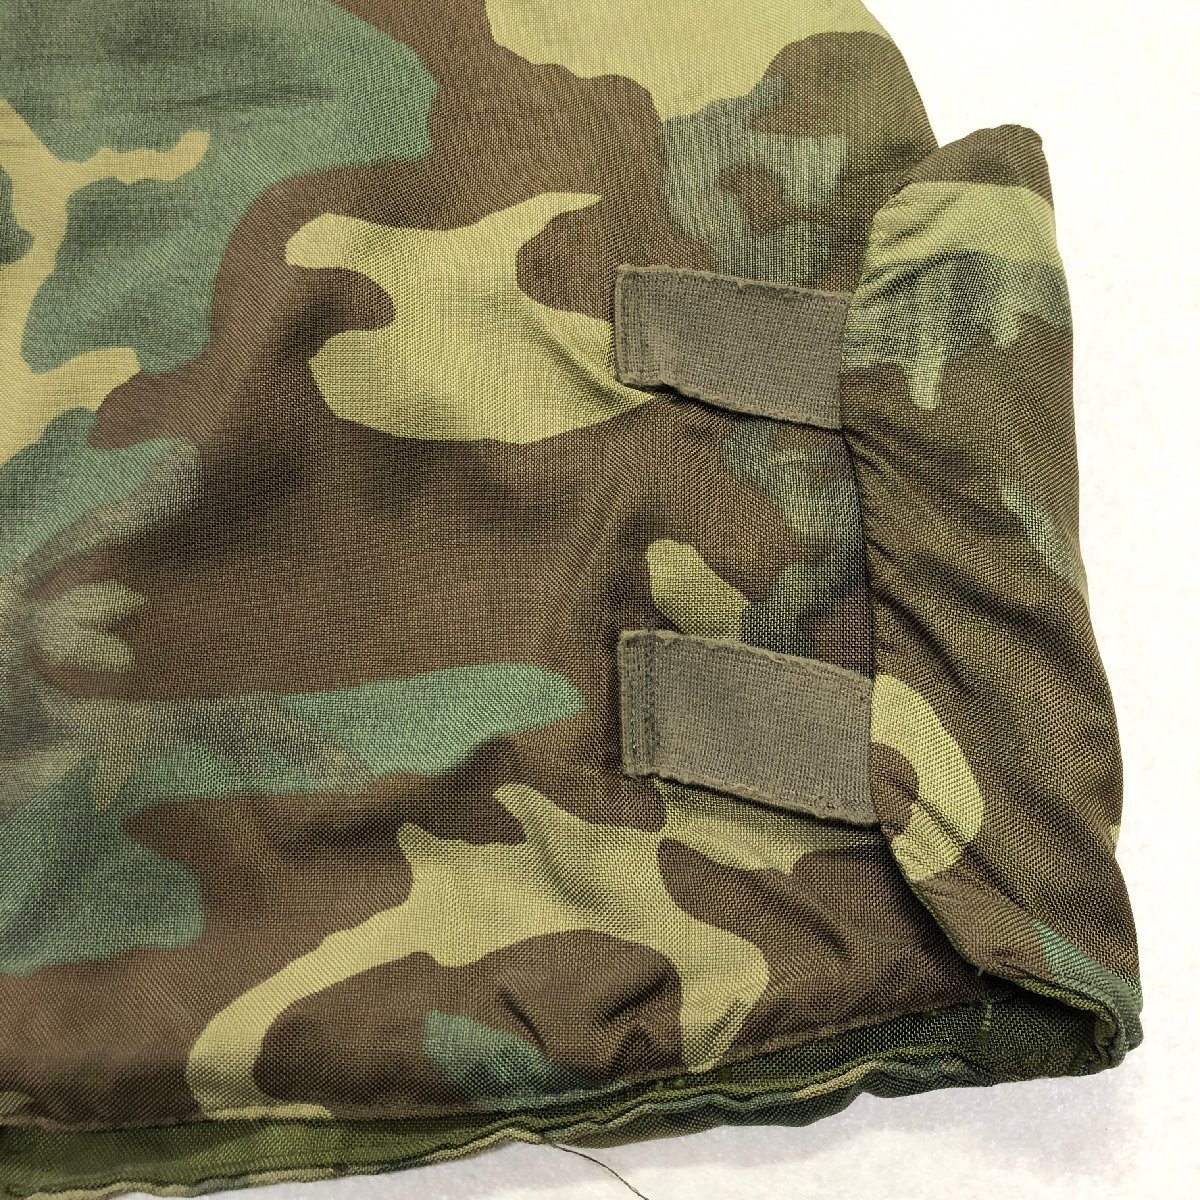 *80s JAY DEE MILITARYWEAR body armor - army military choki the best camouflage camouflage ARMY Vintage men's size L 1.01.*